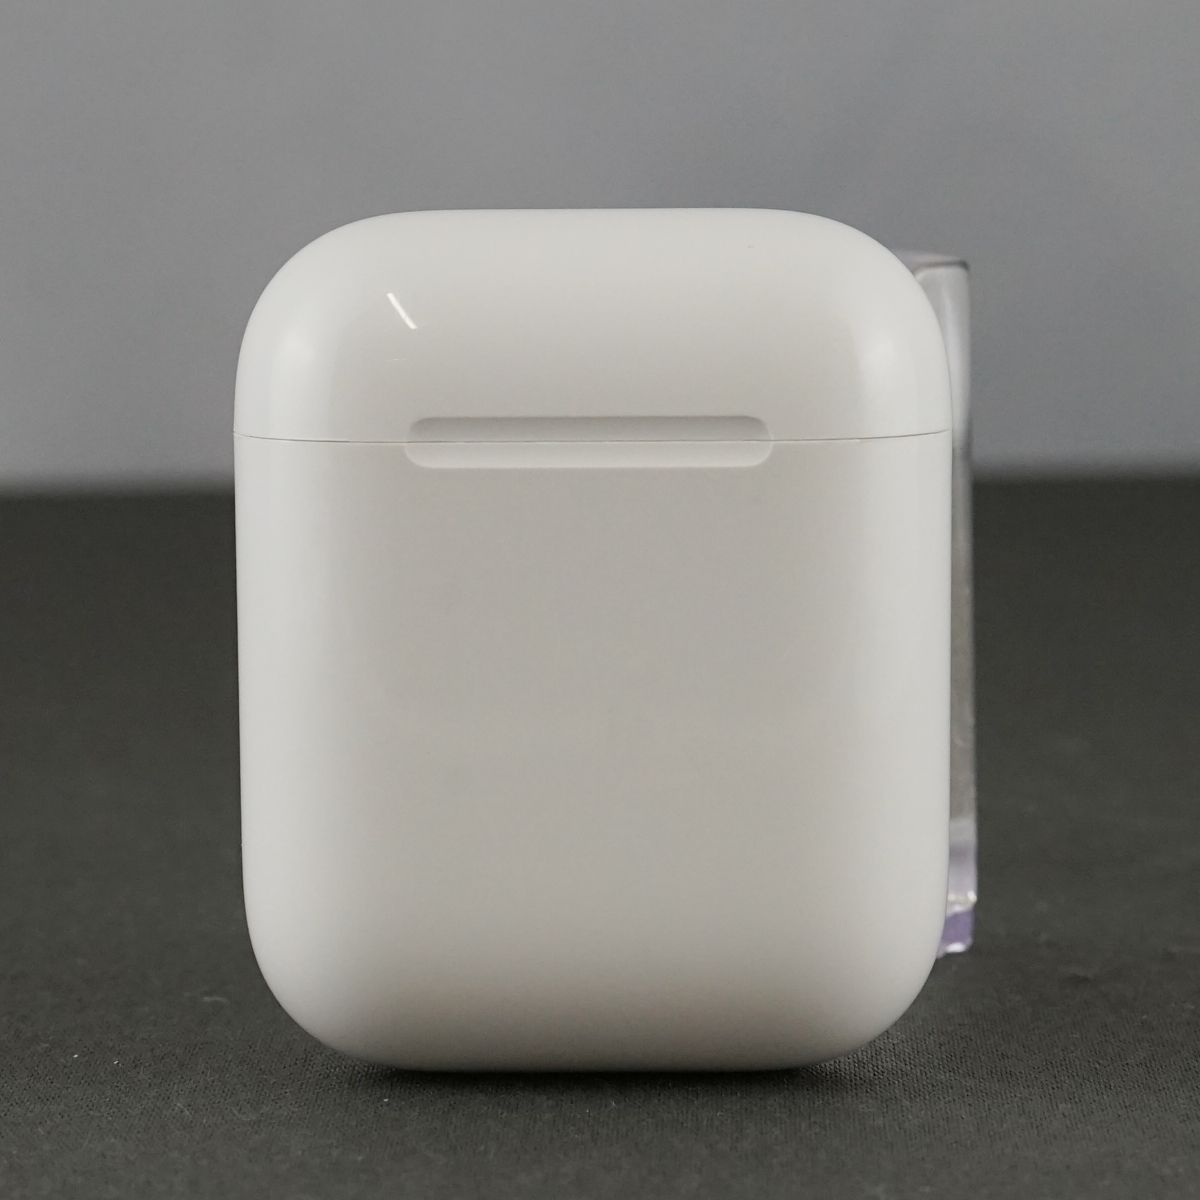 Apple AirPods with Charging Case エアーポッズ 充電ケースのみ 第二 ...